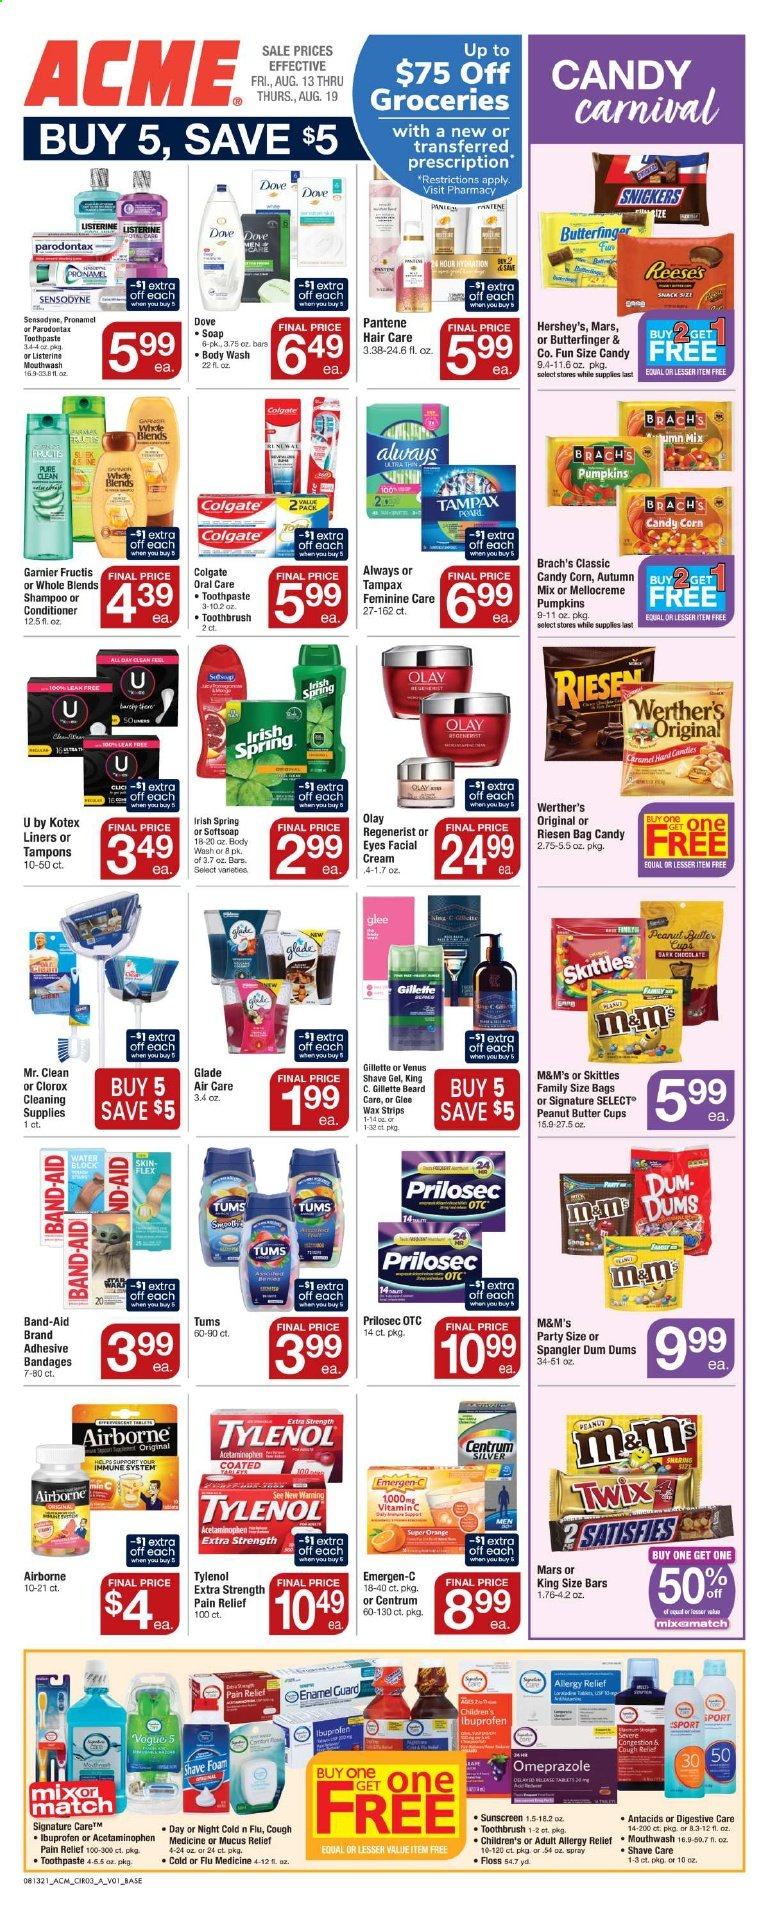 thumbnail - ACME Flyer - 08/13/2021 - 08/19/2021 - Sales products - corn, pumpkin, Reese's, Hershey's, snack, Snickers, Twix, Mars, M&M's, Skittles, peanut butter cups, Dove, Clorox, body wash, shampoo, Softsoap, soap, Colgate, Listerine, toothbrush, toothpaste, Sensodyne, mouthwash, Tampax, Kotex, tampons, Garnier, Olay, conditioner, Pantene, Fructis, Gillette, shave gel, Venus, wax strips, Glade, pain relief, Tylenol, vitamin c, Ibuprofen, Emergen-C, Centrum, allergy relief. Page 4.